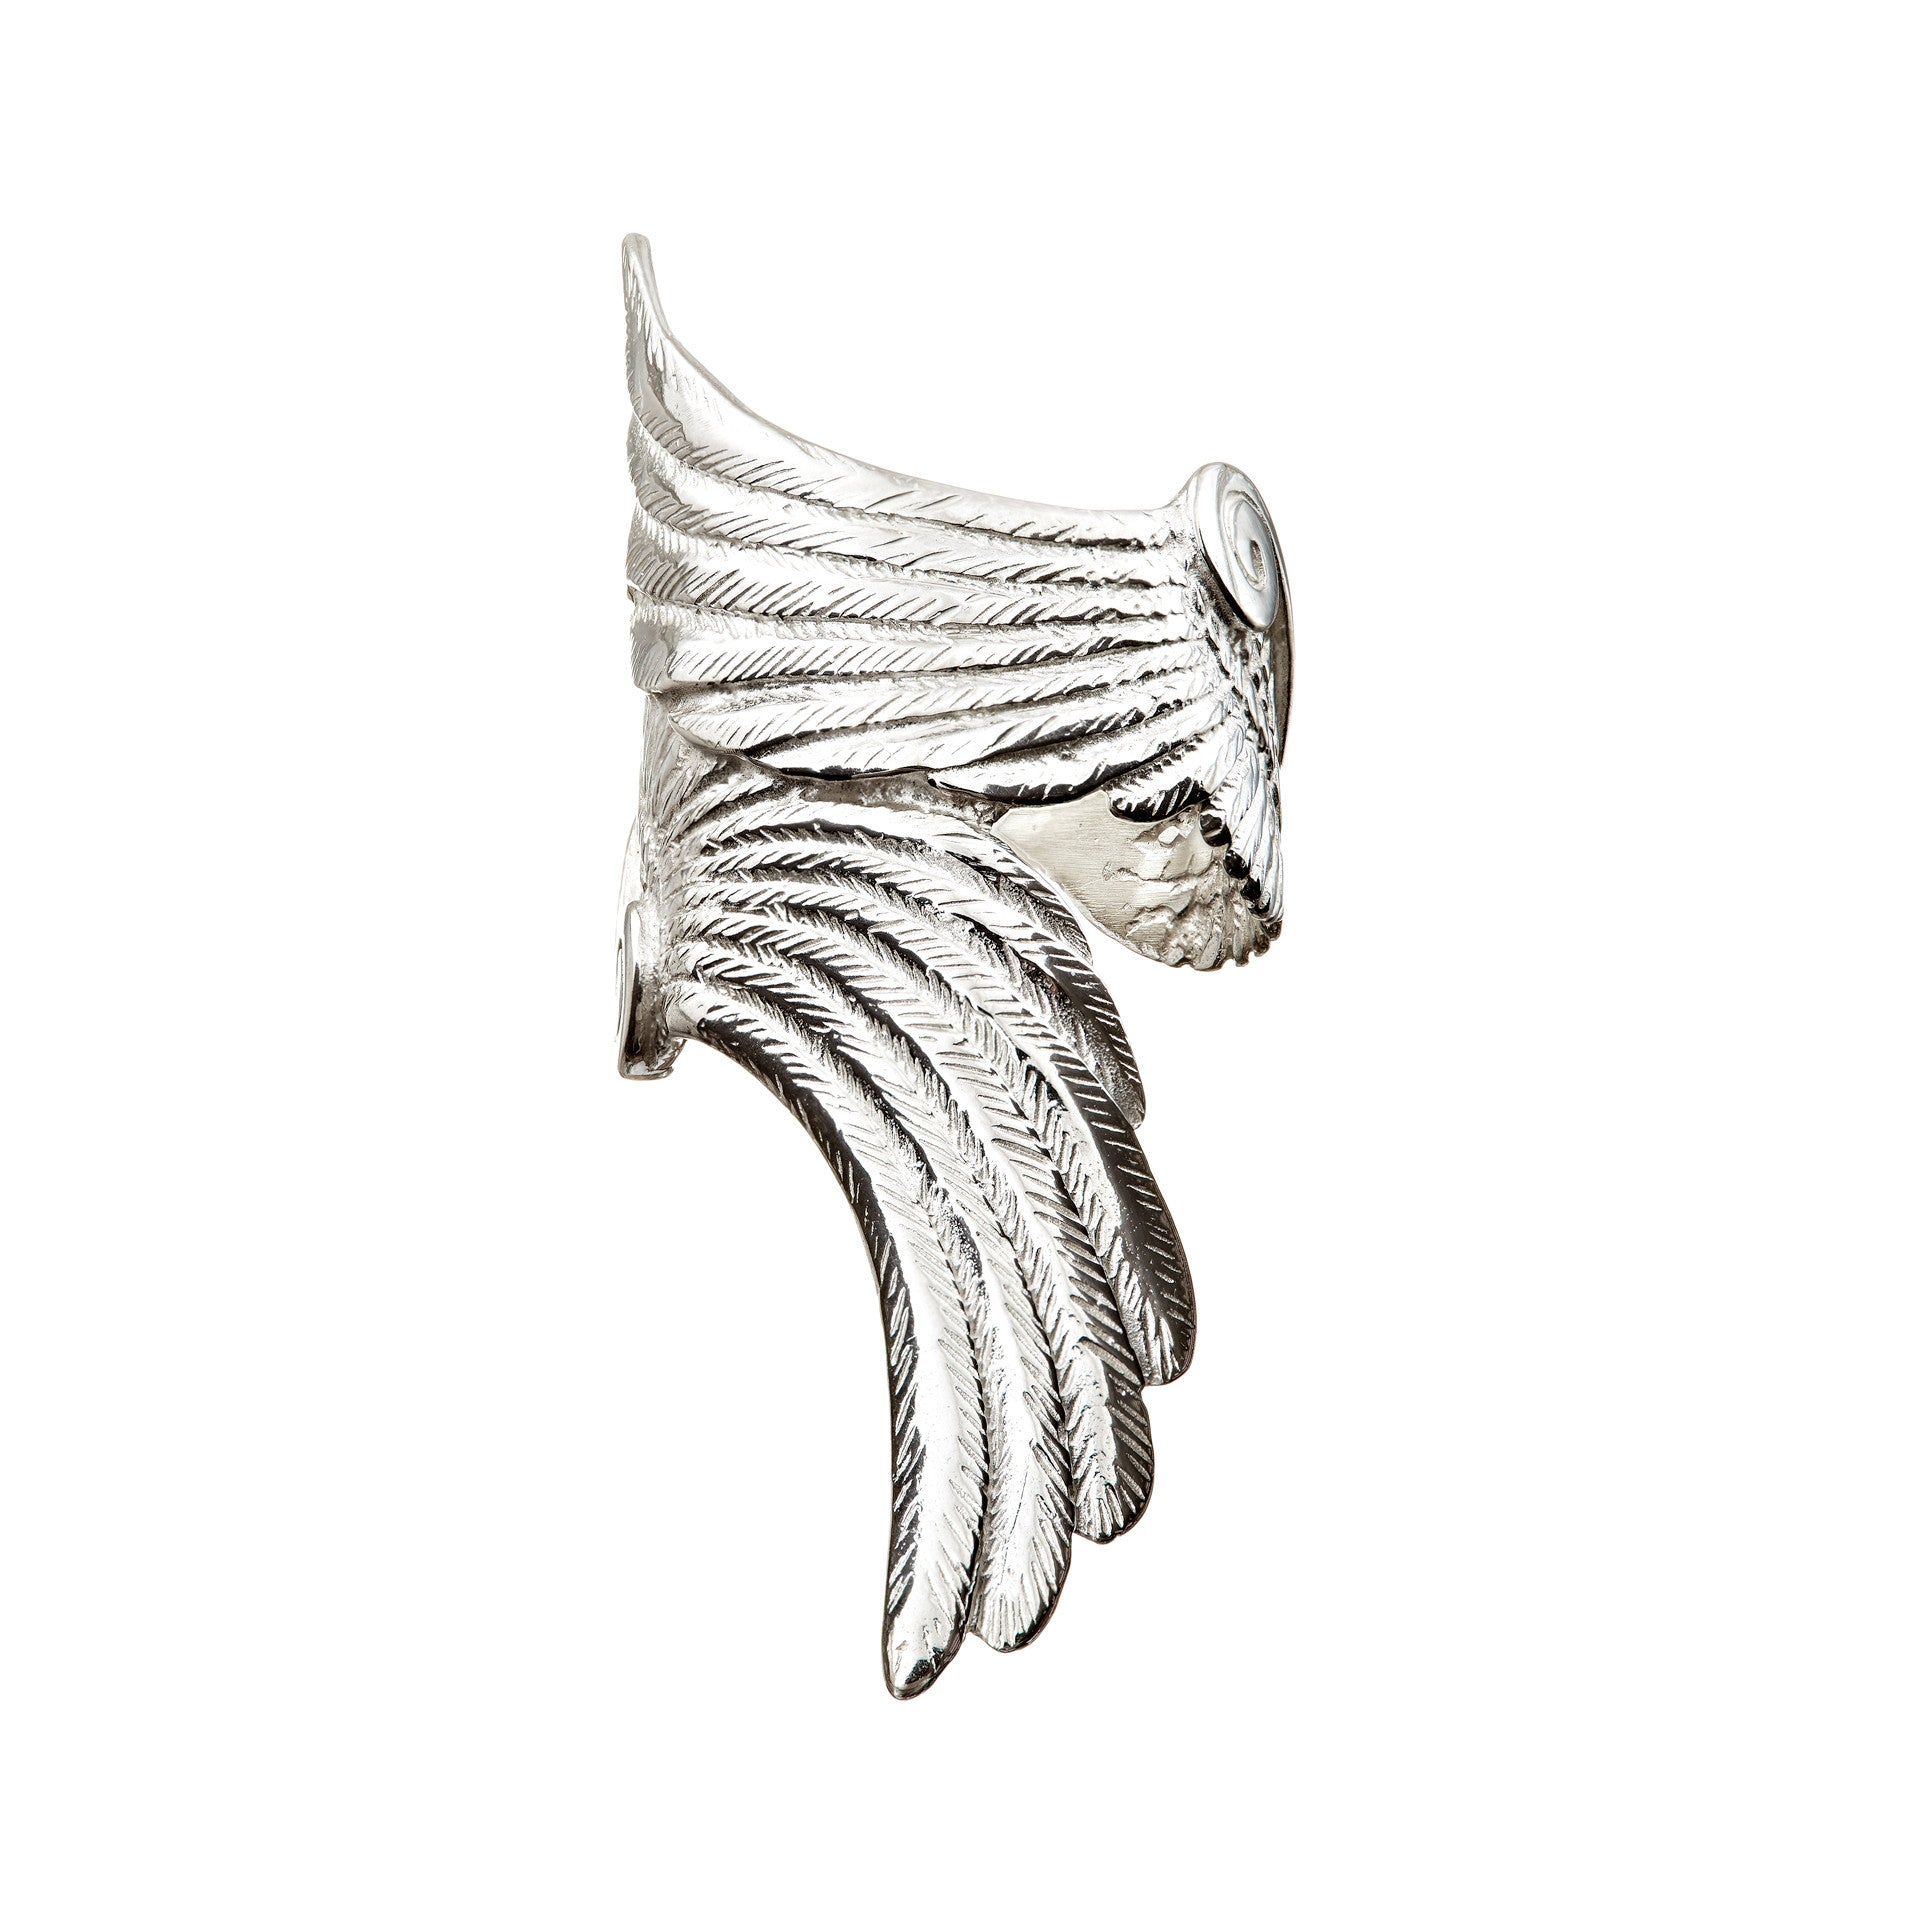 Handmade Irish angel jewelry piece, the Angel Wings Ring made of sterling silver 